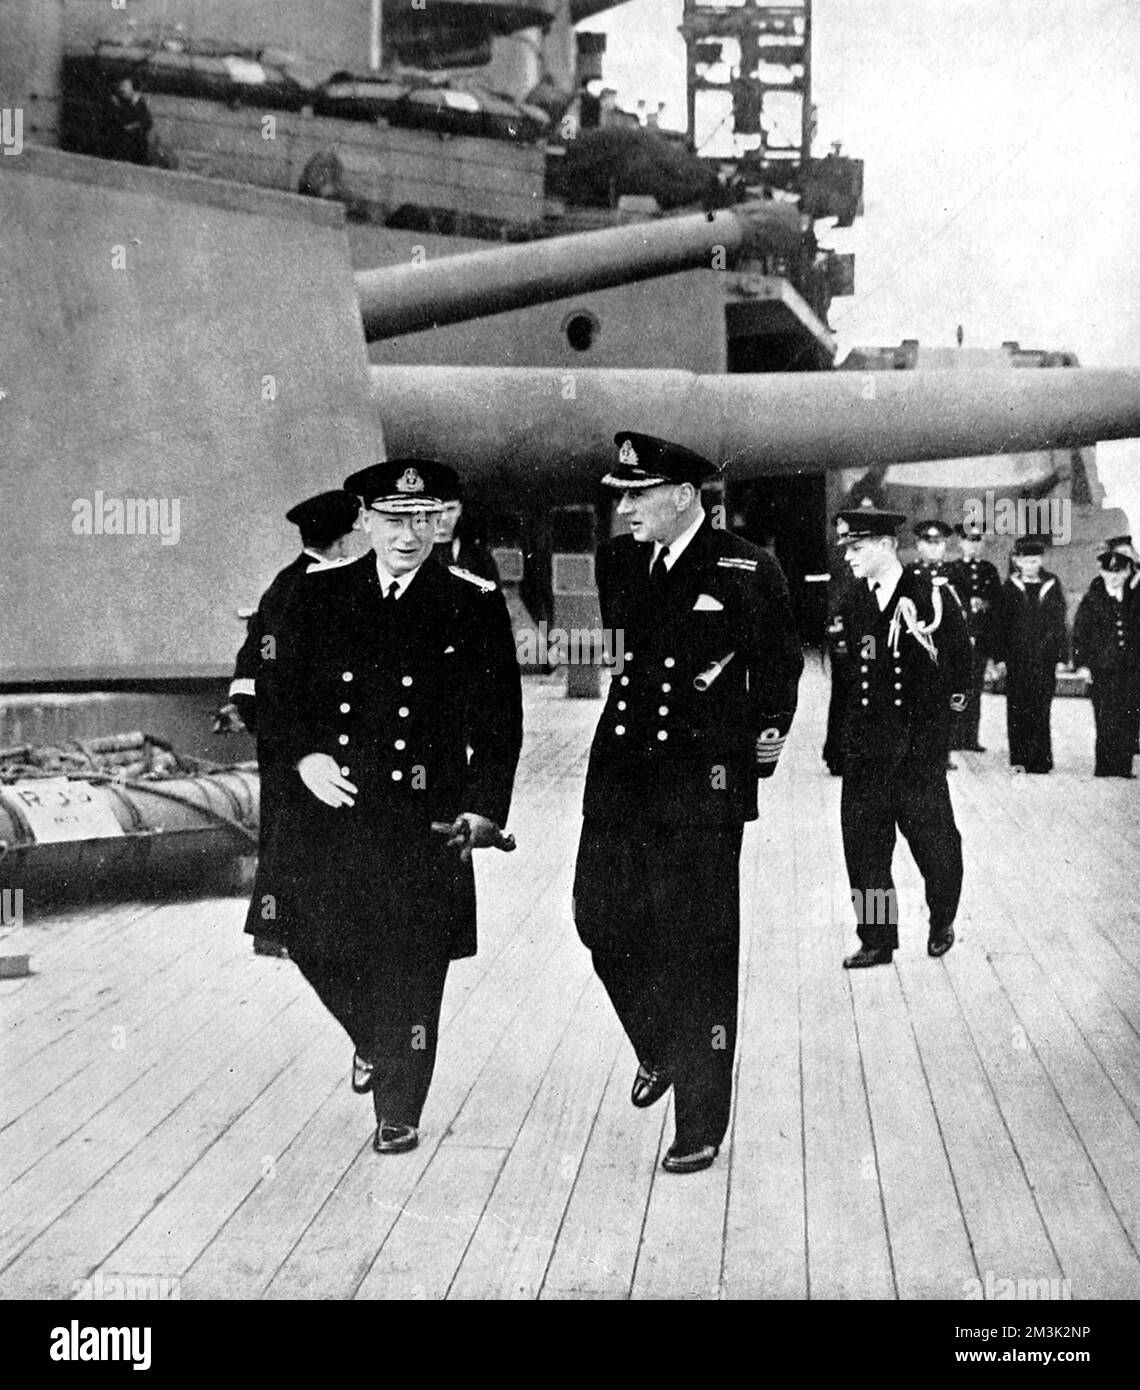 Admiral Sir John Tovey (left) and Captain J.C. Leach on the quarter deck of the Royal Navy battleship HMS 'Prince of Wales', 1941.     Date: 1941 Stock Photo